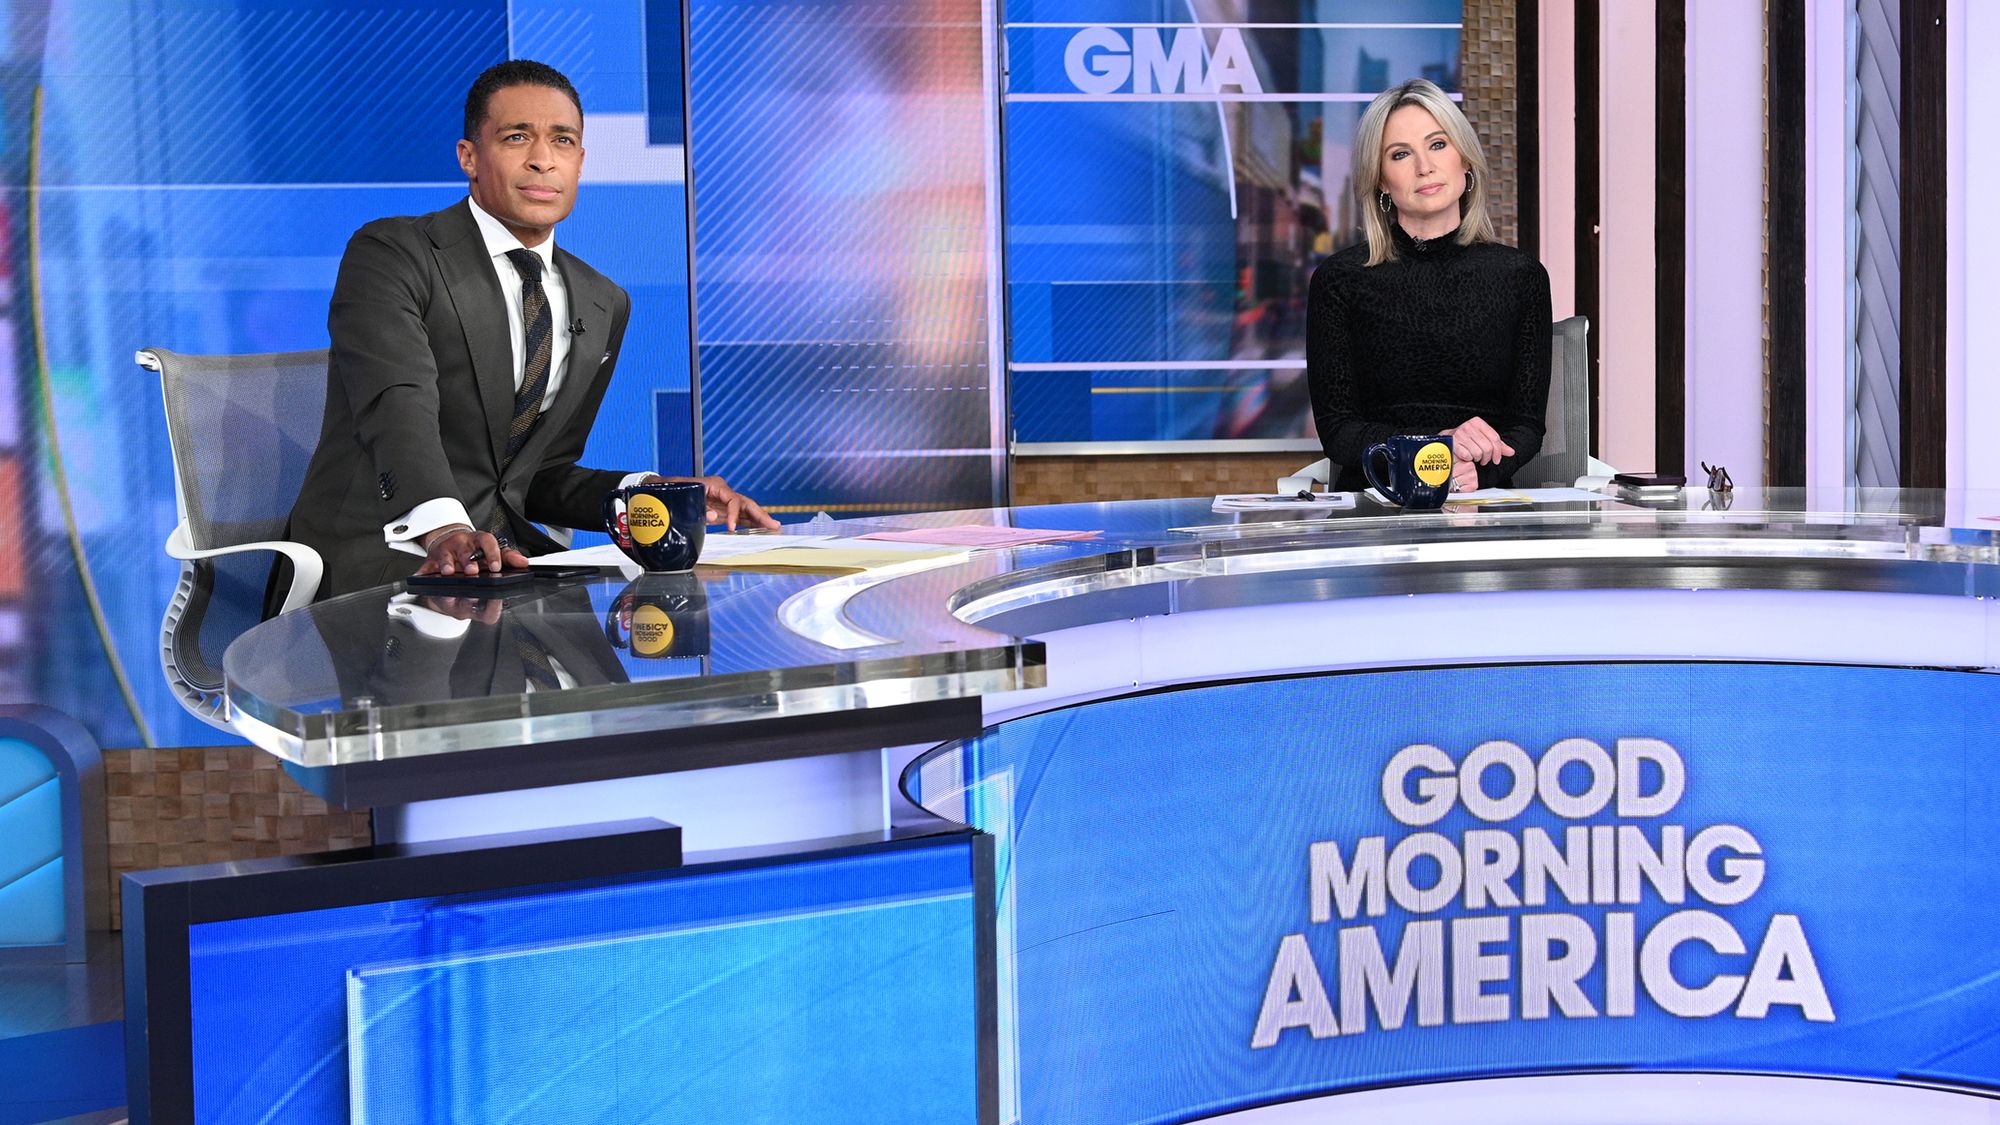 GMA3 alum Amy Robach is NOT taking new job with NewsNation and still  'waiting for right opportunity' after ABC exit